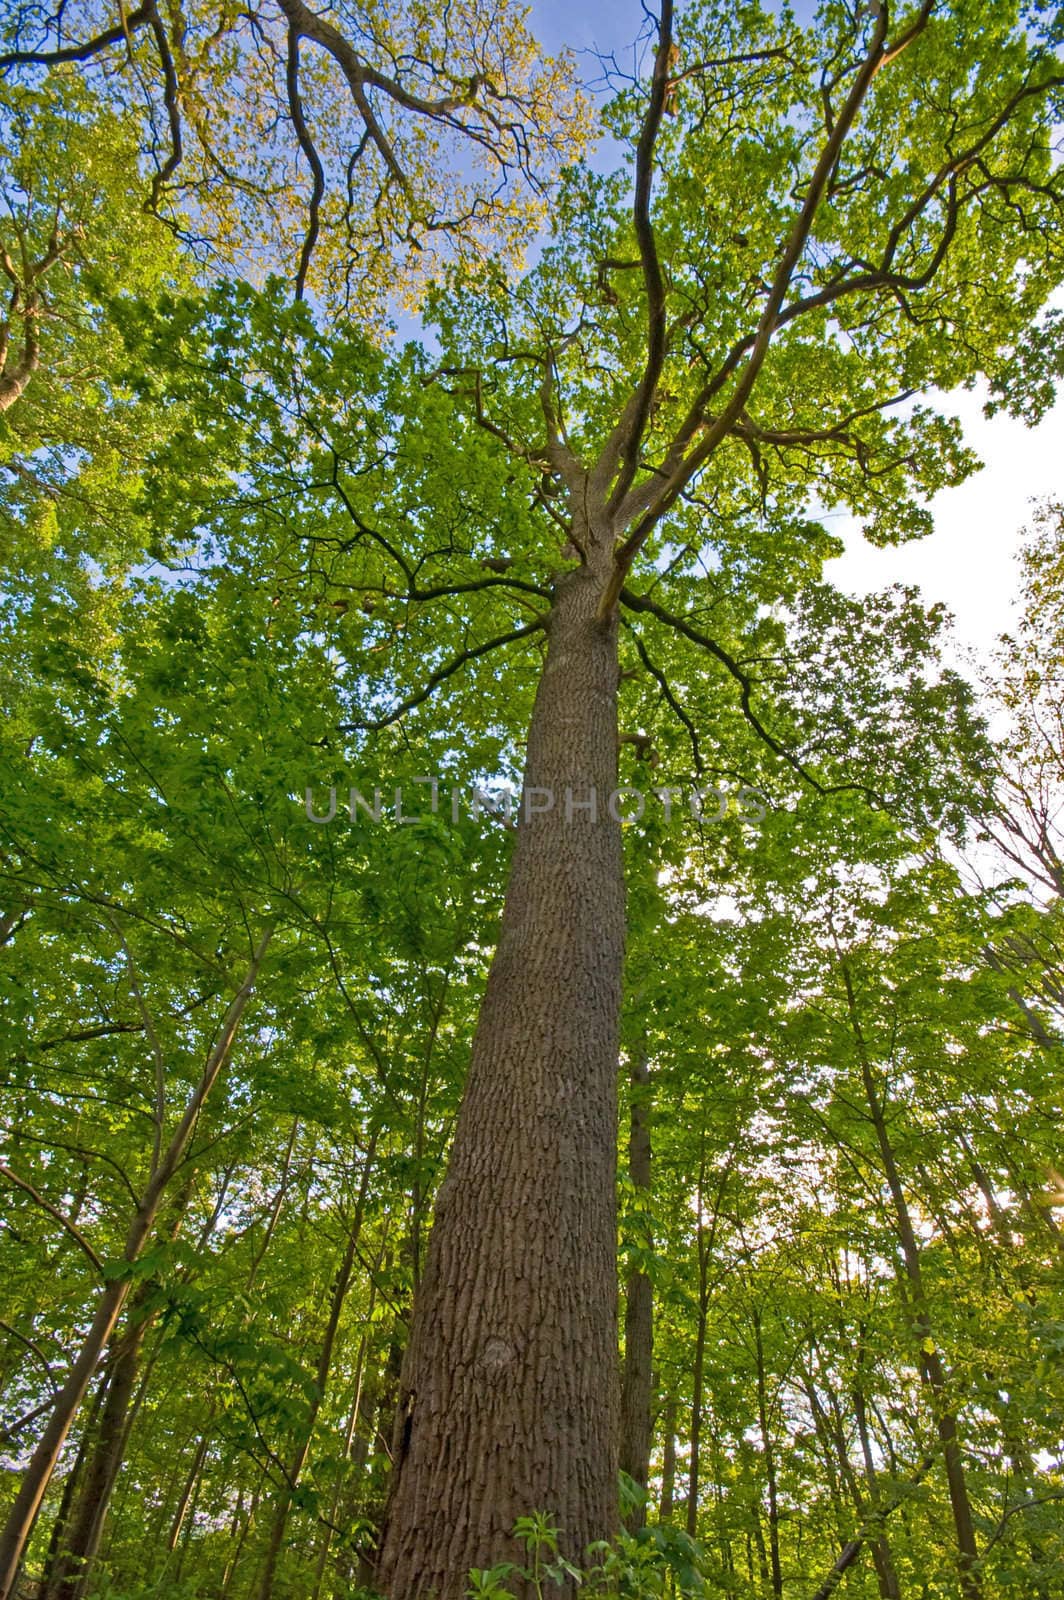 tree seen from below with bark visible and the nice green leaves against blue sky
